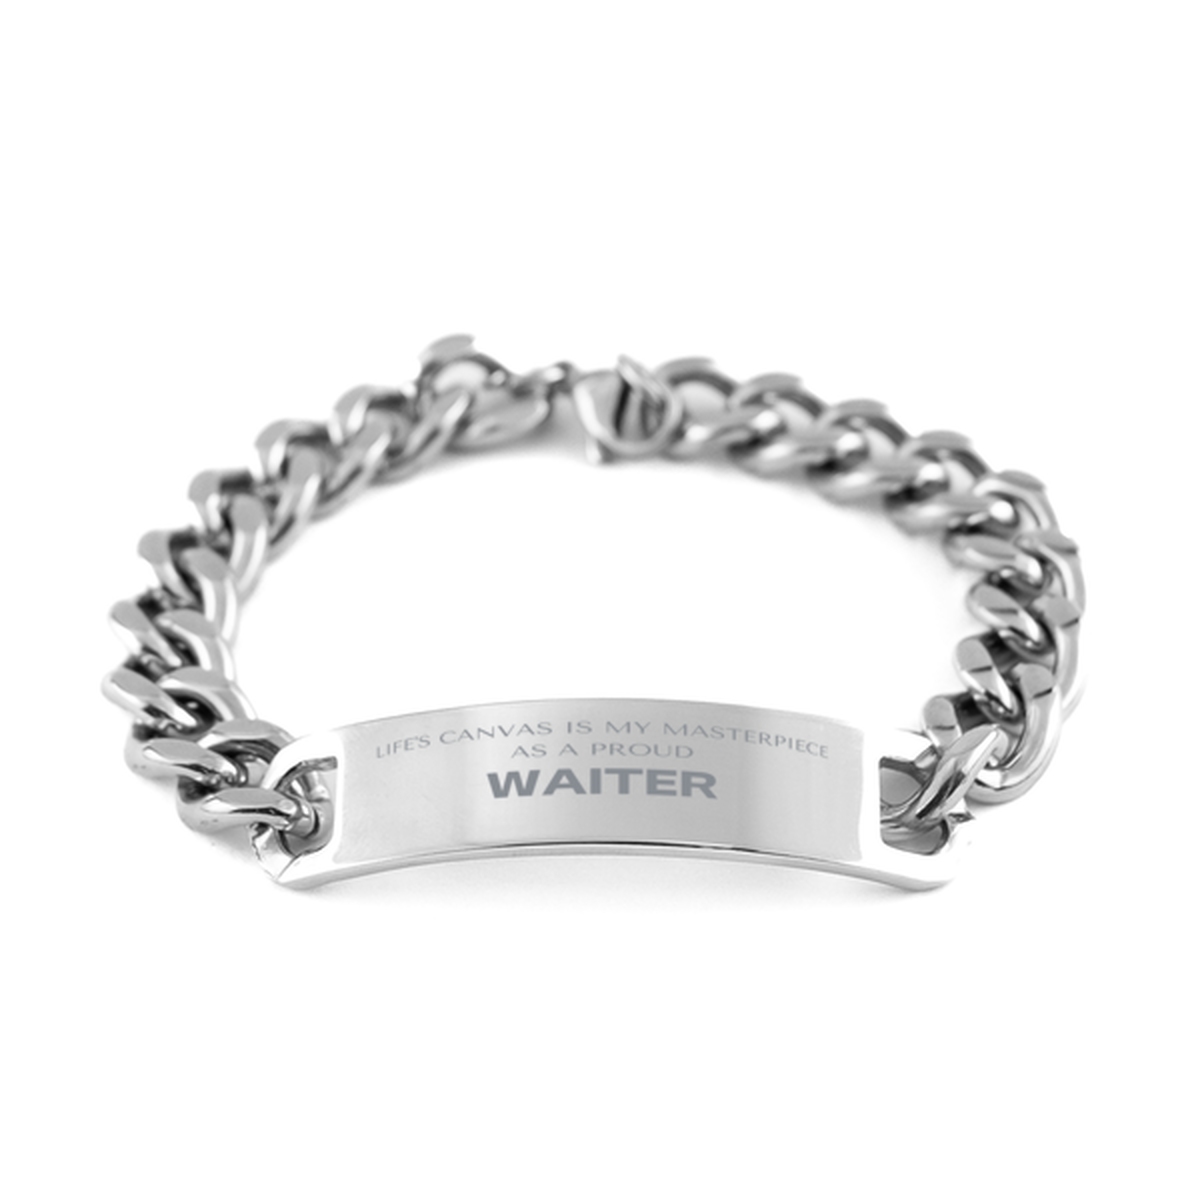 Proud Waiter Gifts, Life's canvas is my masterpiece, Epic Birthday Christmas Unique Cuban Chain Stainless Steel Bracelet For Waiter, Coworkers, Men, Women, Friends